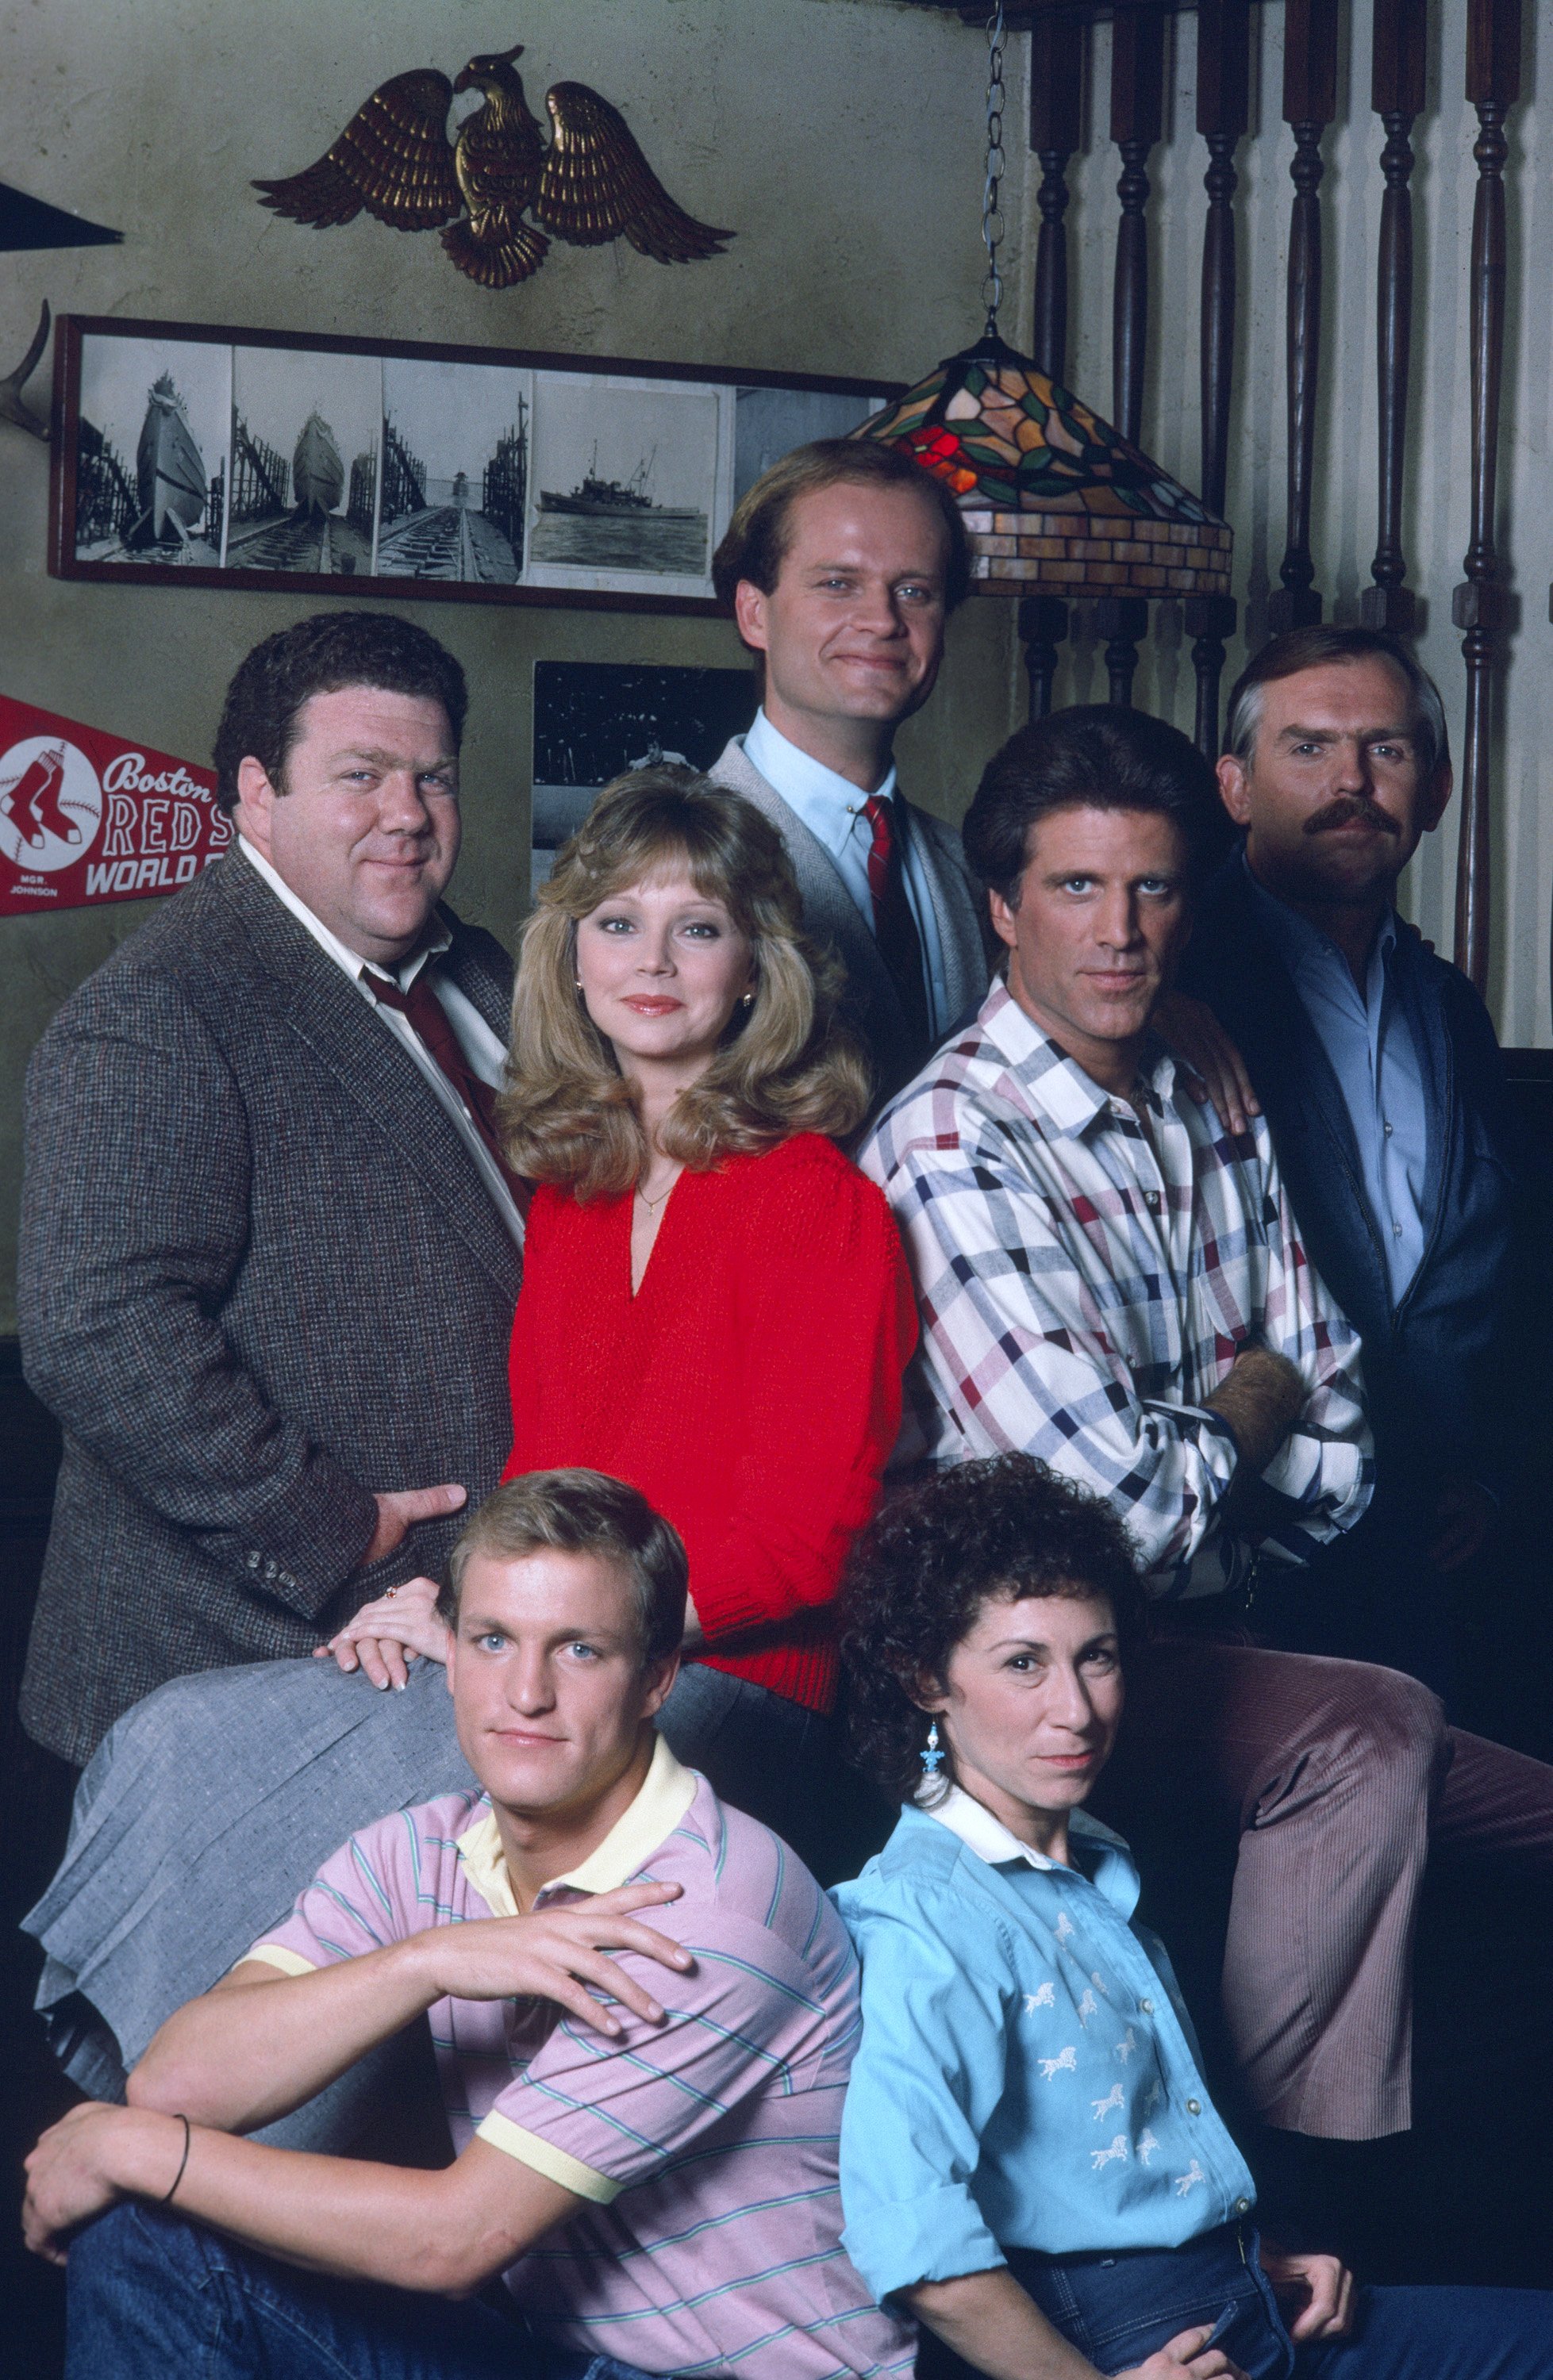 The cast of "Cheers" George Wendt, Shelley Long, Woody Harrelson, Kelsey Grammer, Ted Danson, Rhea Perlman, John Razenberger pose for a portrait | Photo: Getty Images